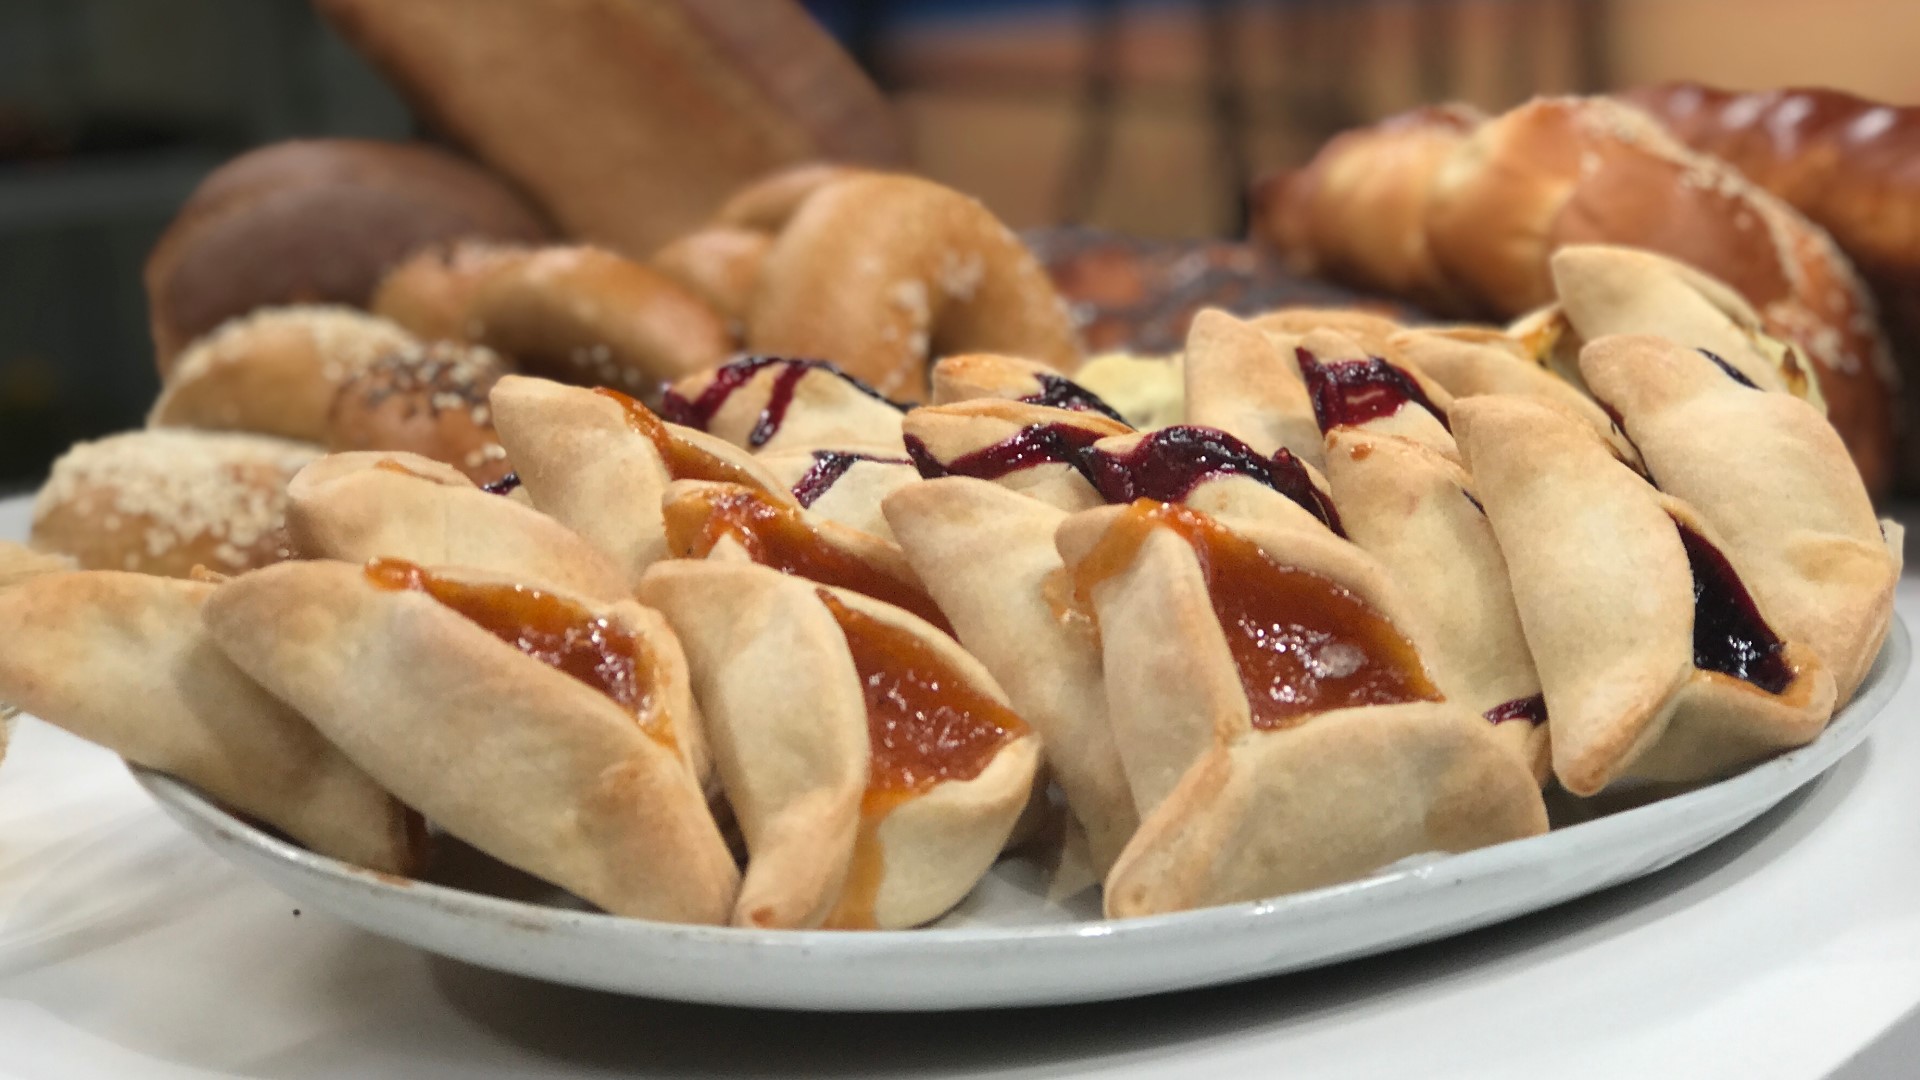 The Jewish Deli in Seattle's Pinehurst neighborhood makes the sweet and savory treats to celebrate the Festival of Purim starting March 9th. Get the recipe!